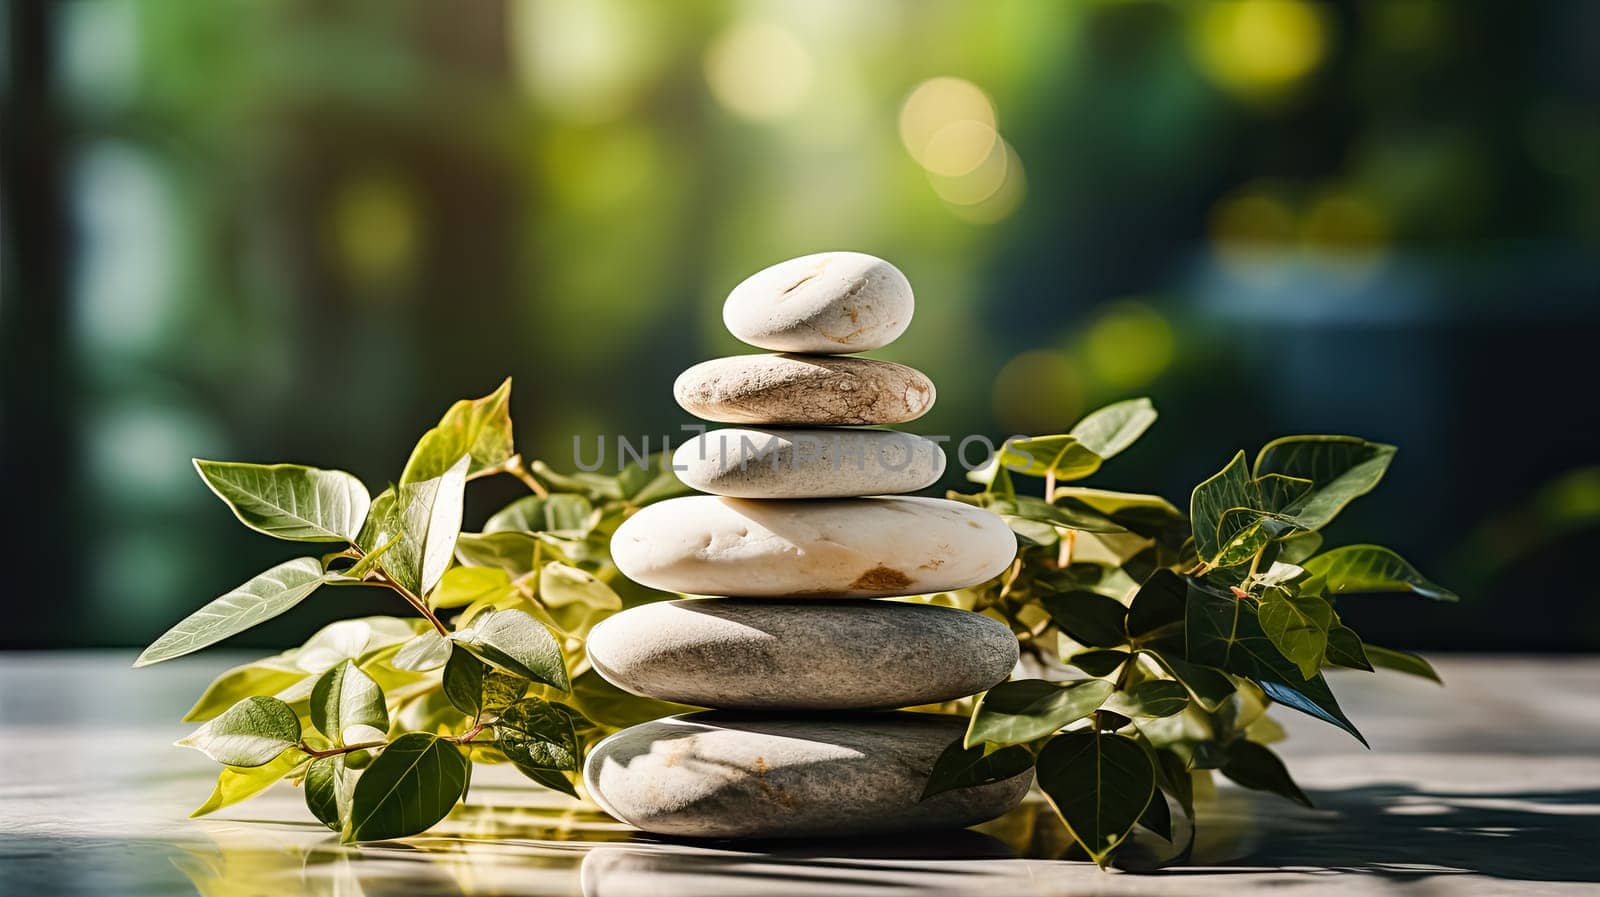 Discover the beauty of balance as stones delicately align against the backdrop of nature. A harmonious composition that reflects tranquility and symmetry.